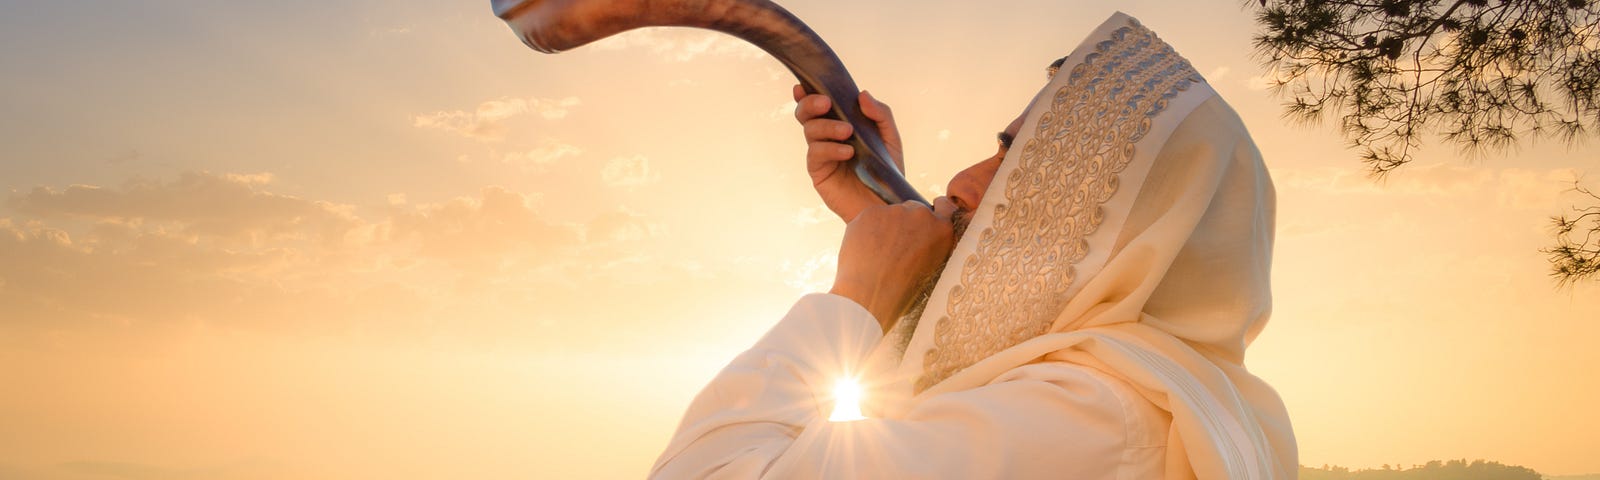 A Jewish man blowing the Shofar (ram’s horn), which is used to blow sounds on Rosh HaShana (the Jewish New Year) and Yom Kippur (day of Atonement)